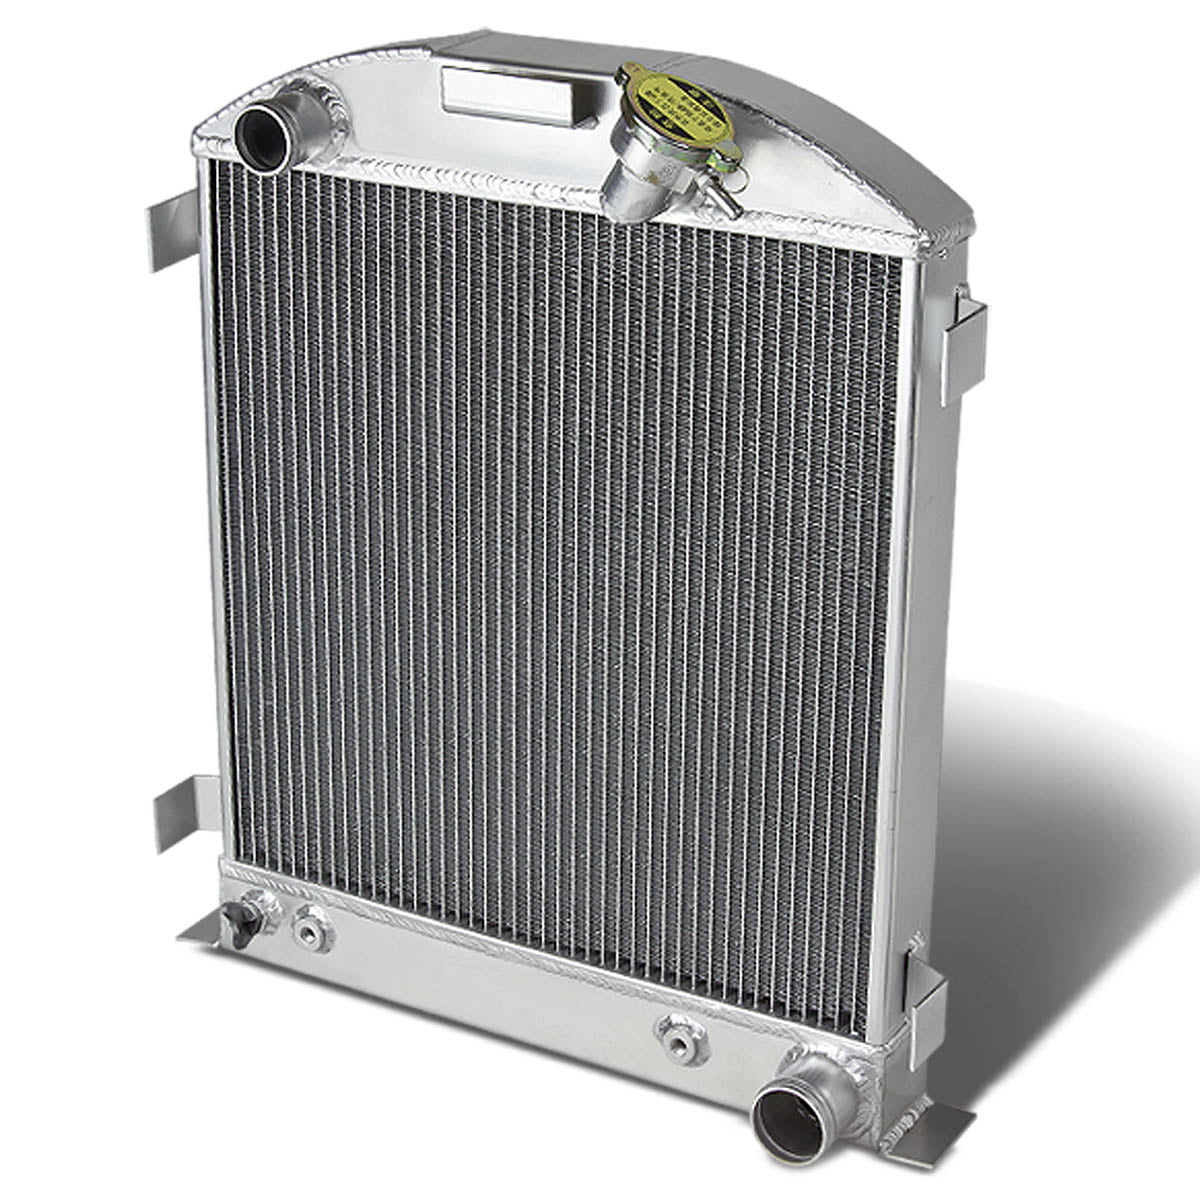 4 Row Western Champion Radiator for 1932 Ford Chopped Chevy/Mopar Configuration